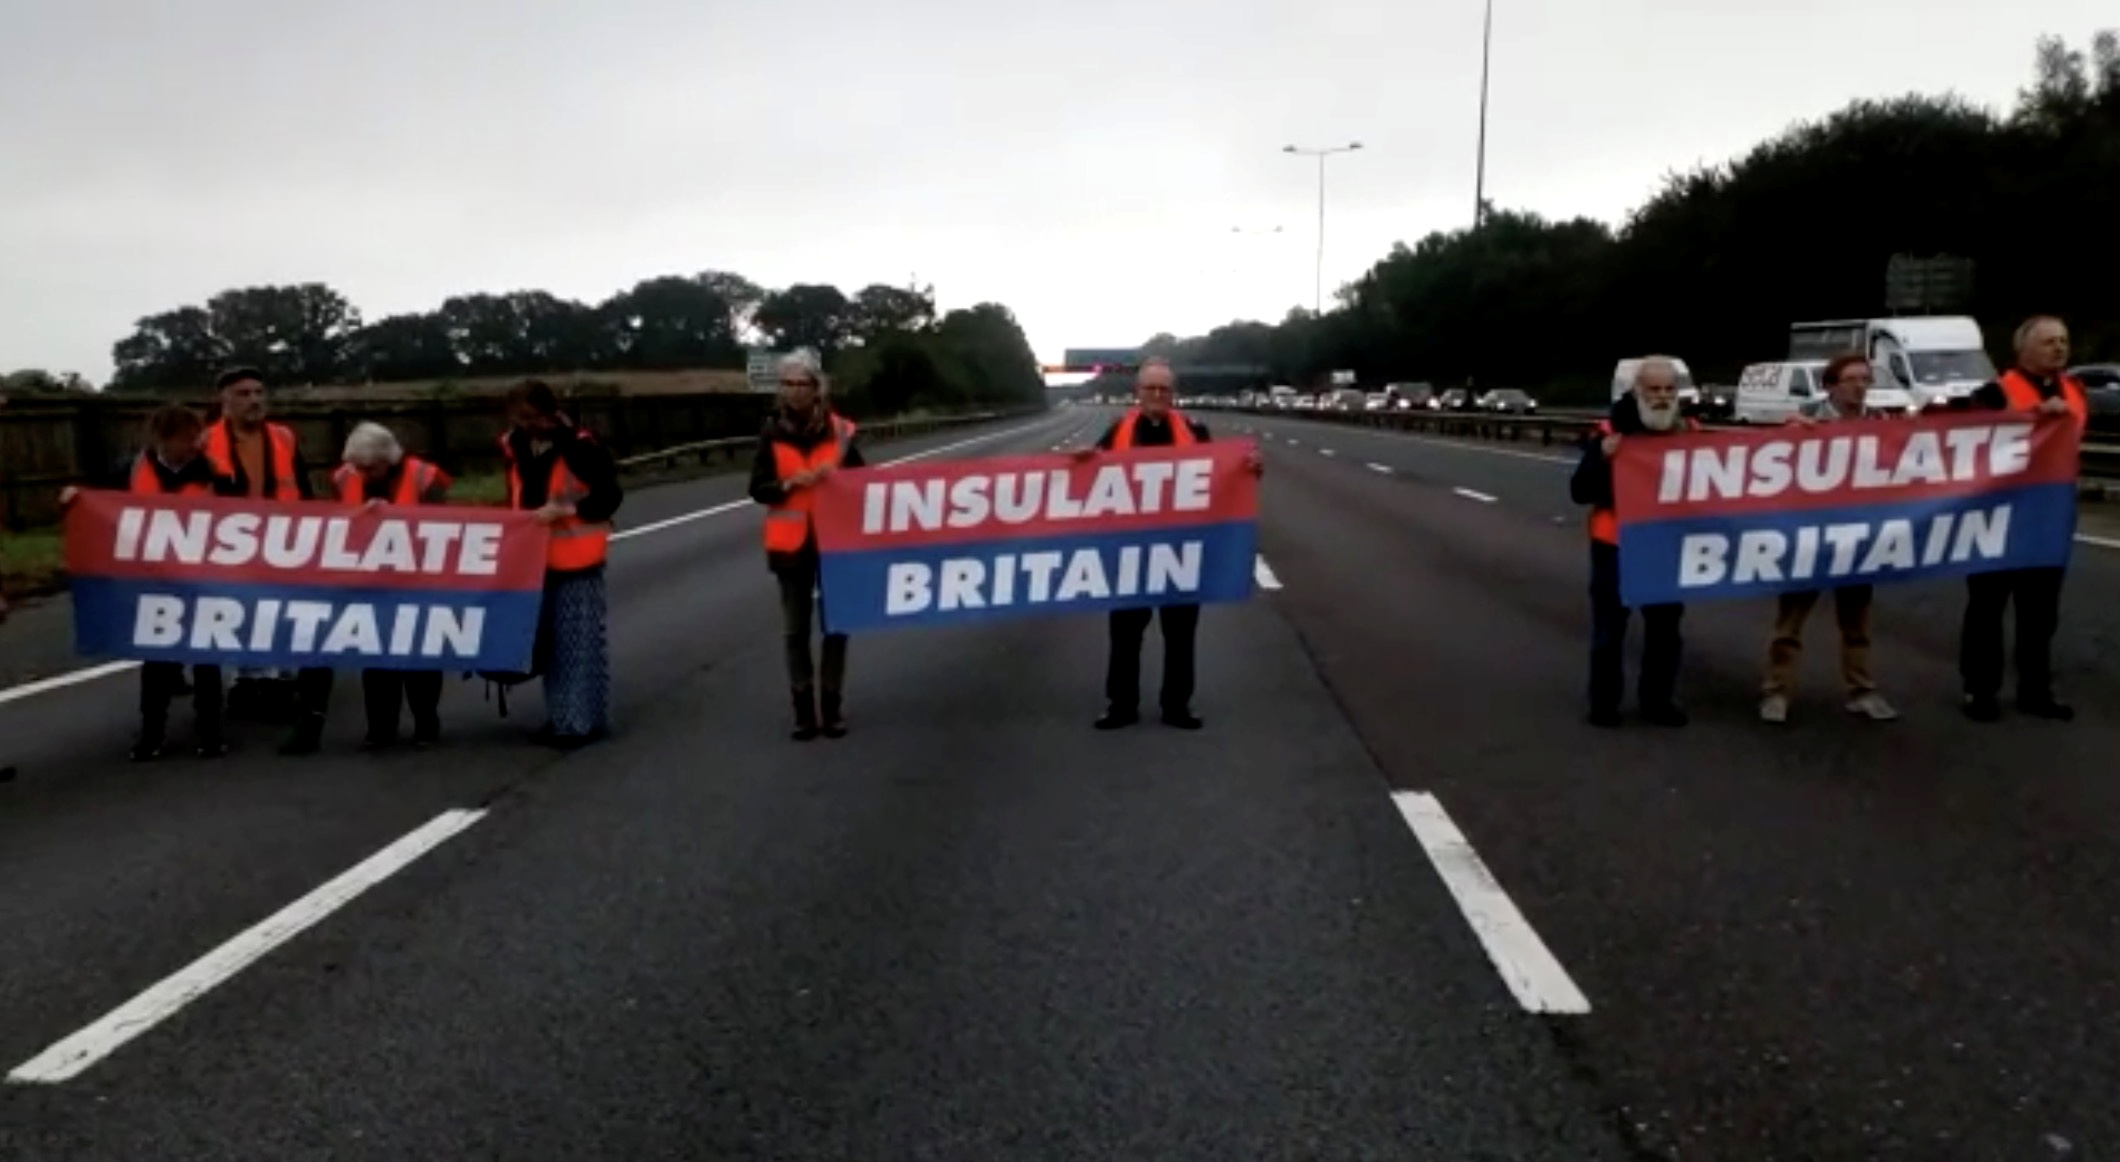 Protest of Insulate Britain on M25 Motorway